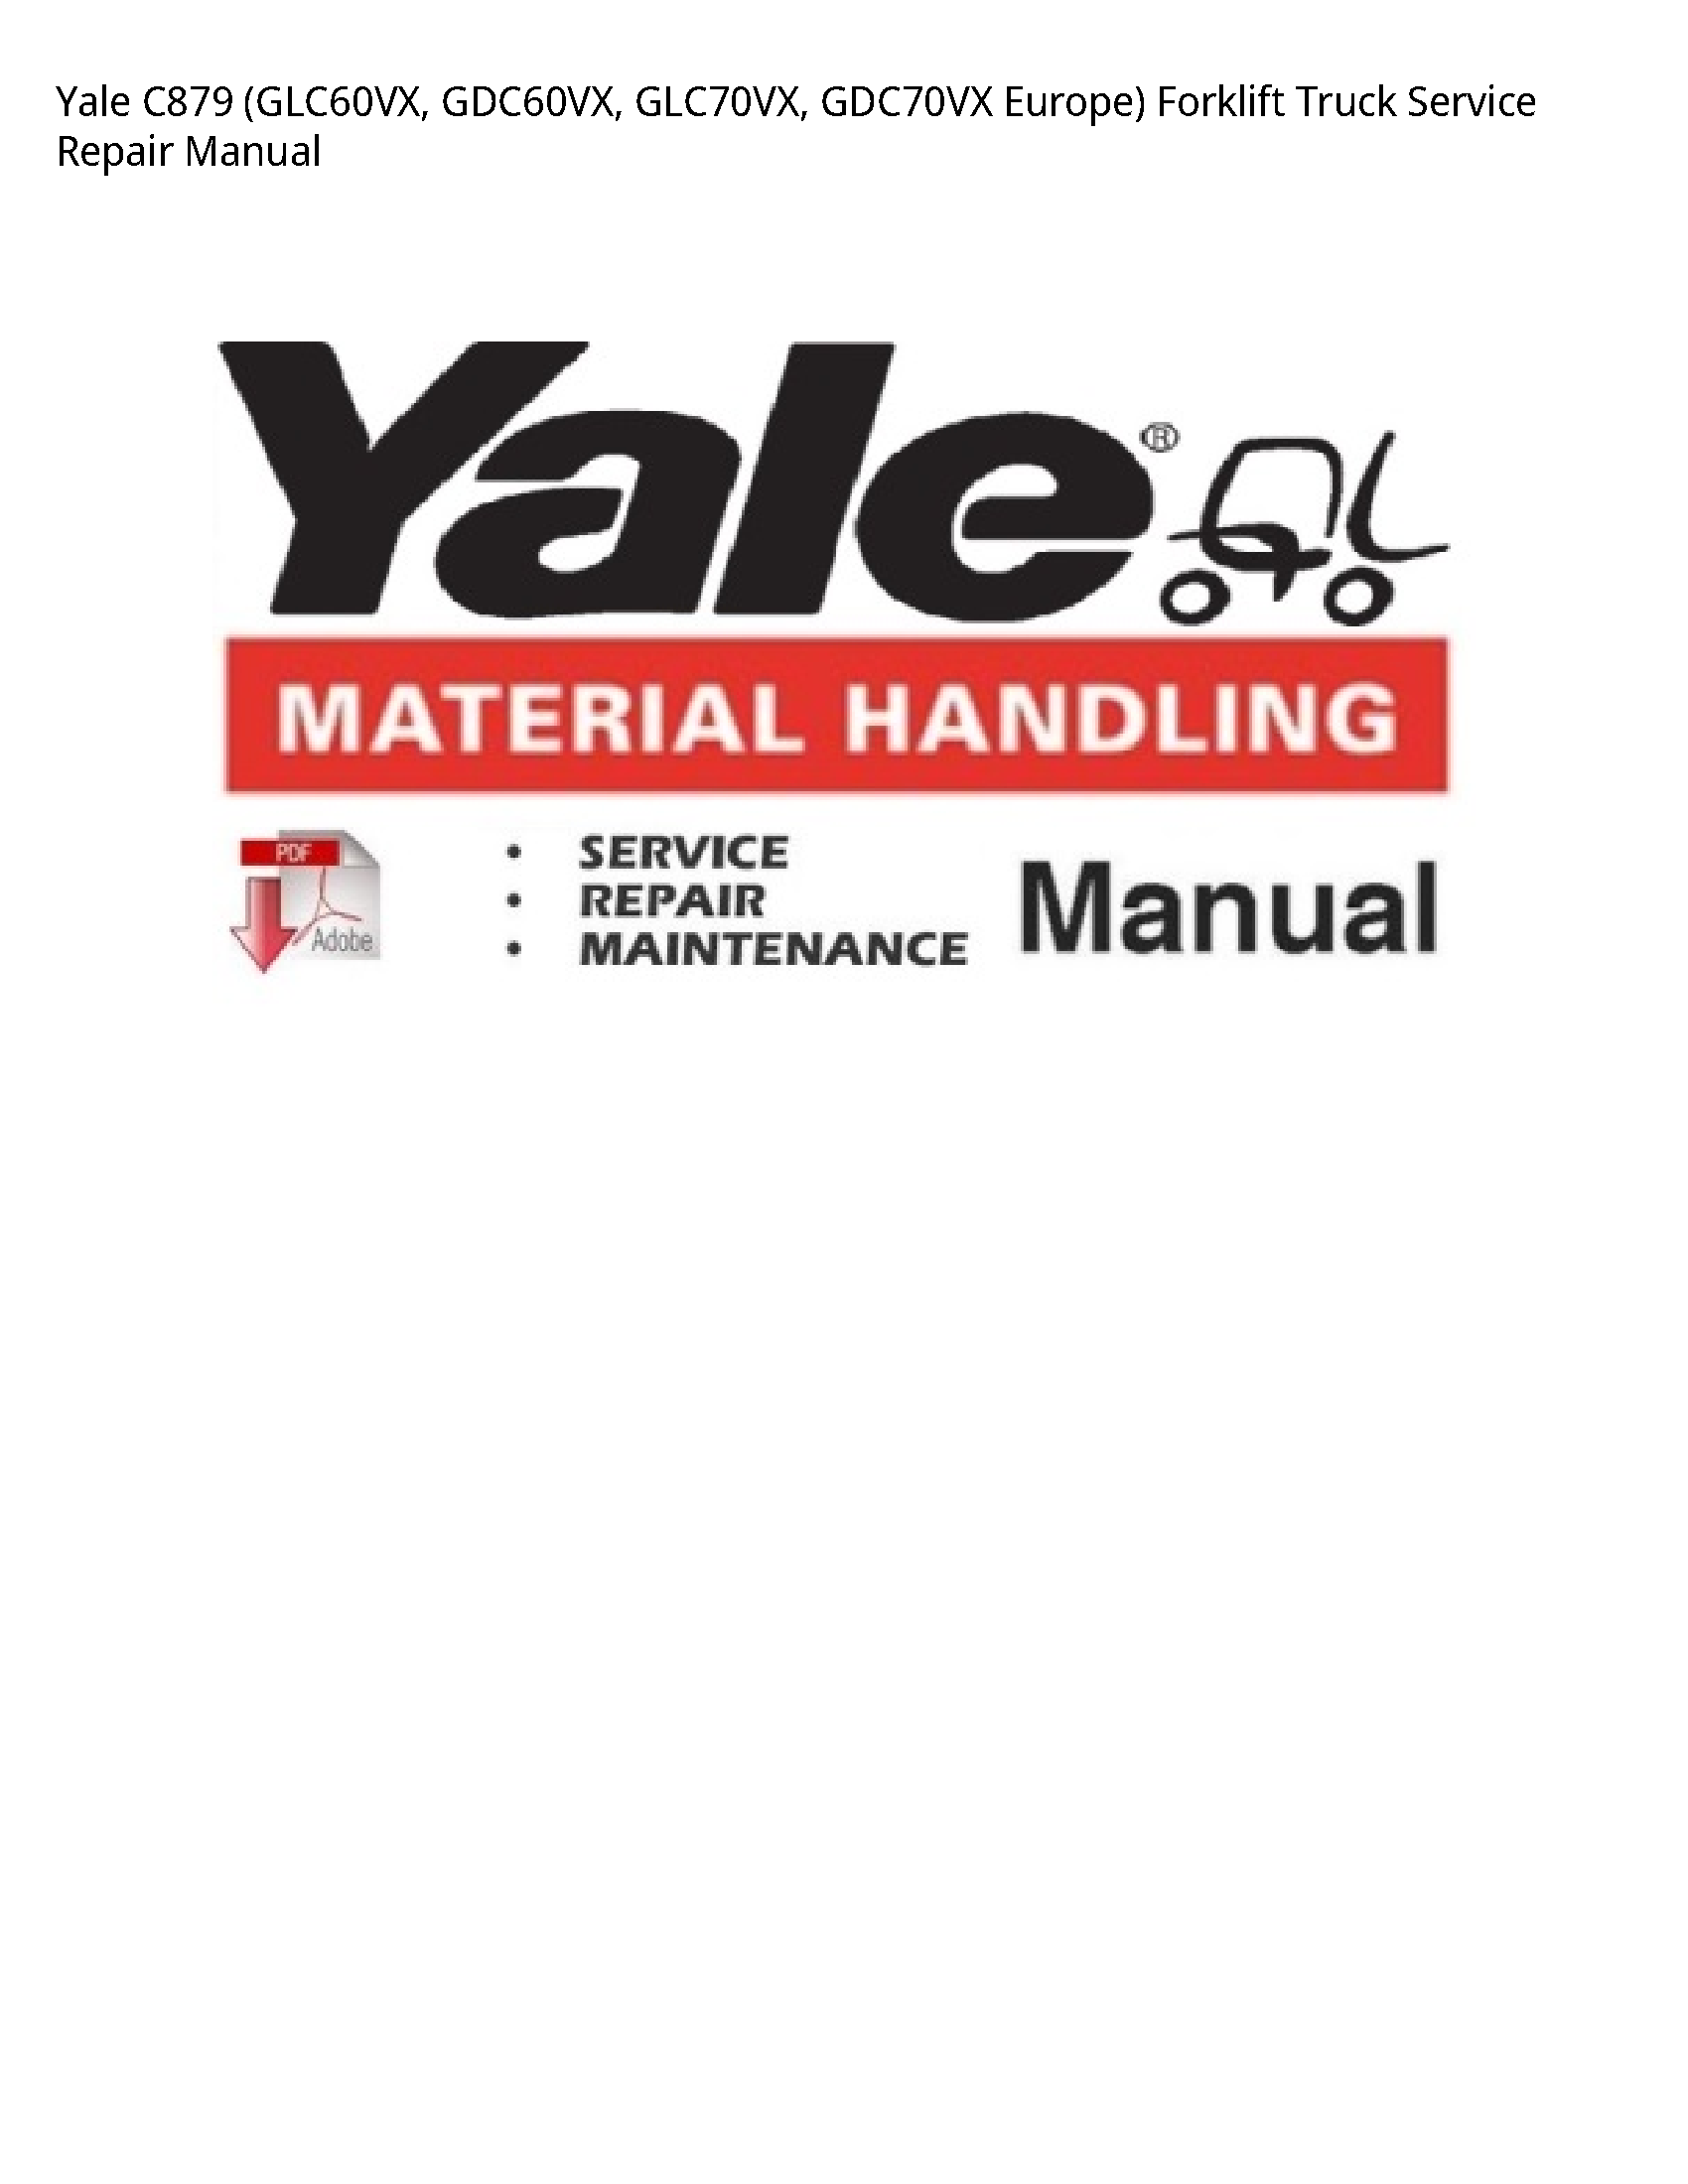 Yale C879 Europe) Forklift Truck manual